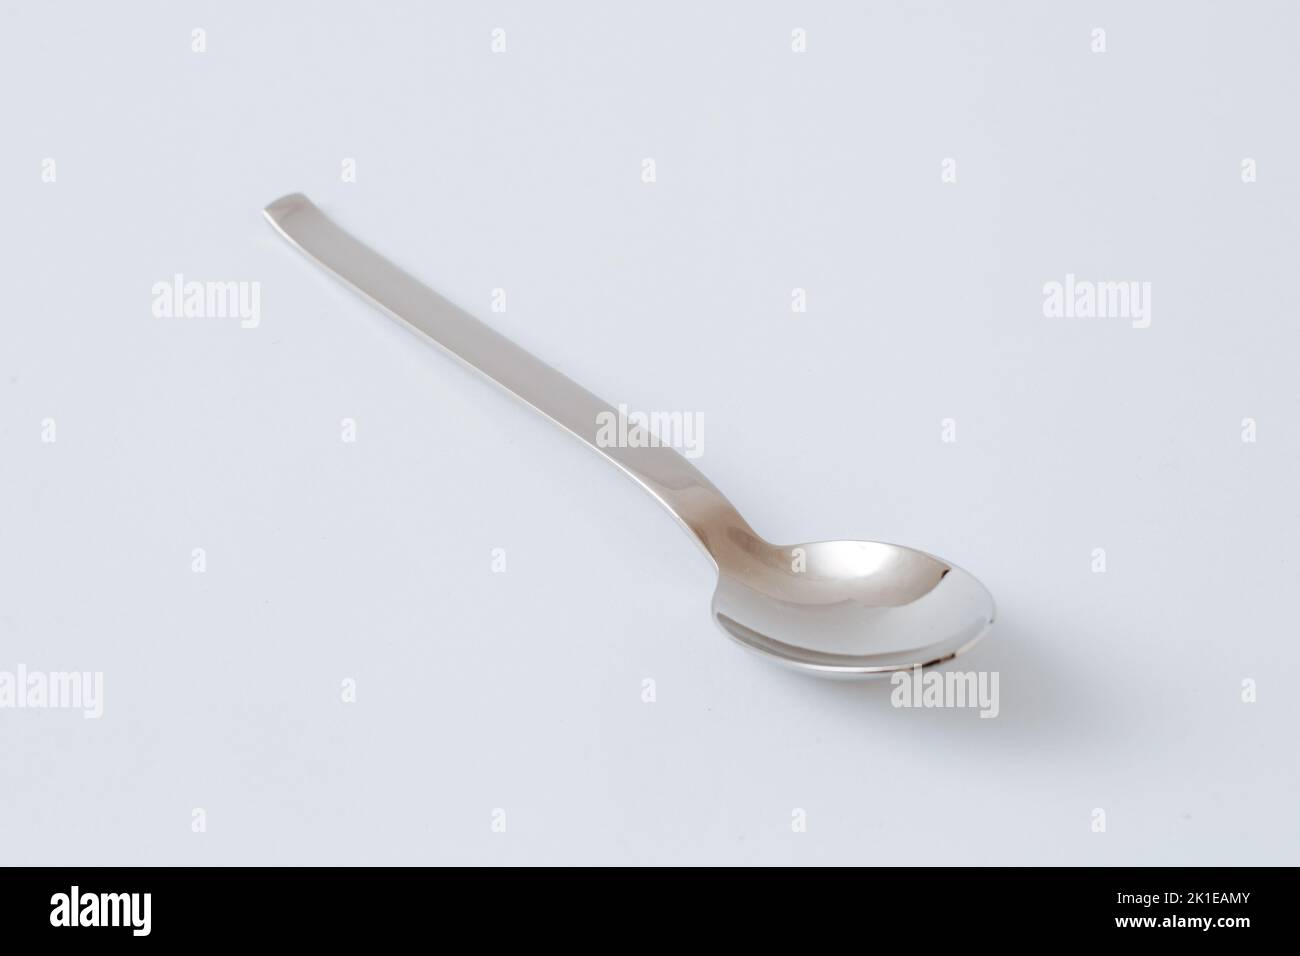 Stainless steel teaspoon on white background, kitchenware, copy space, close-up. Stock Photo